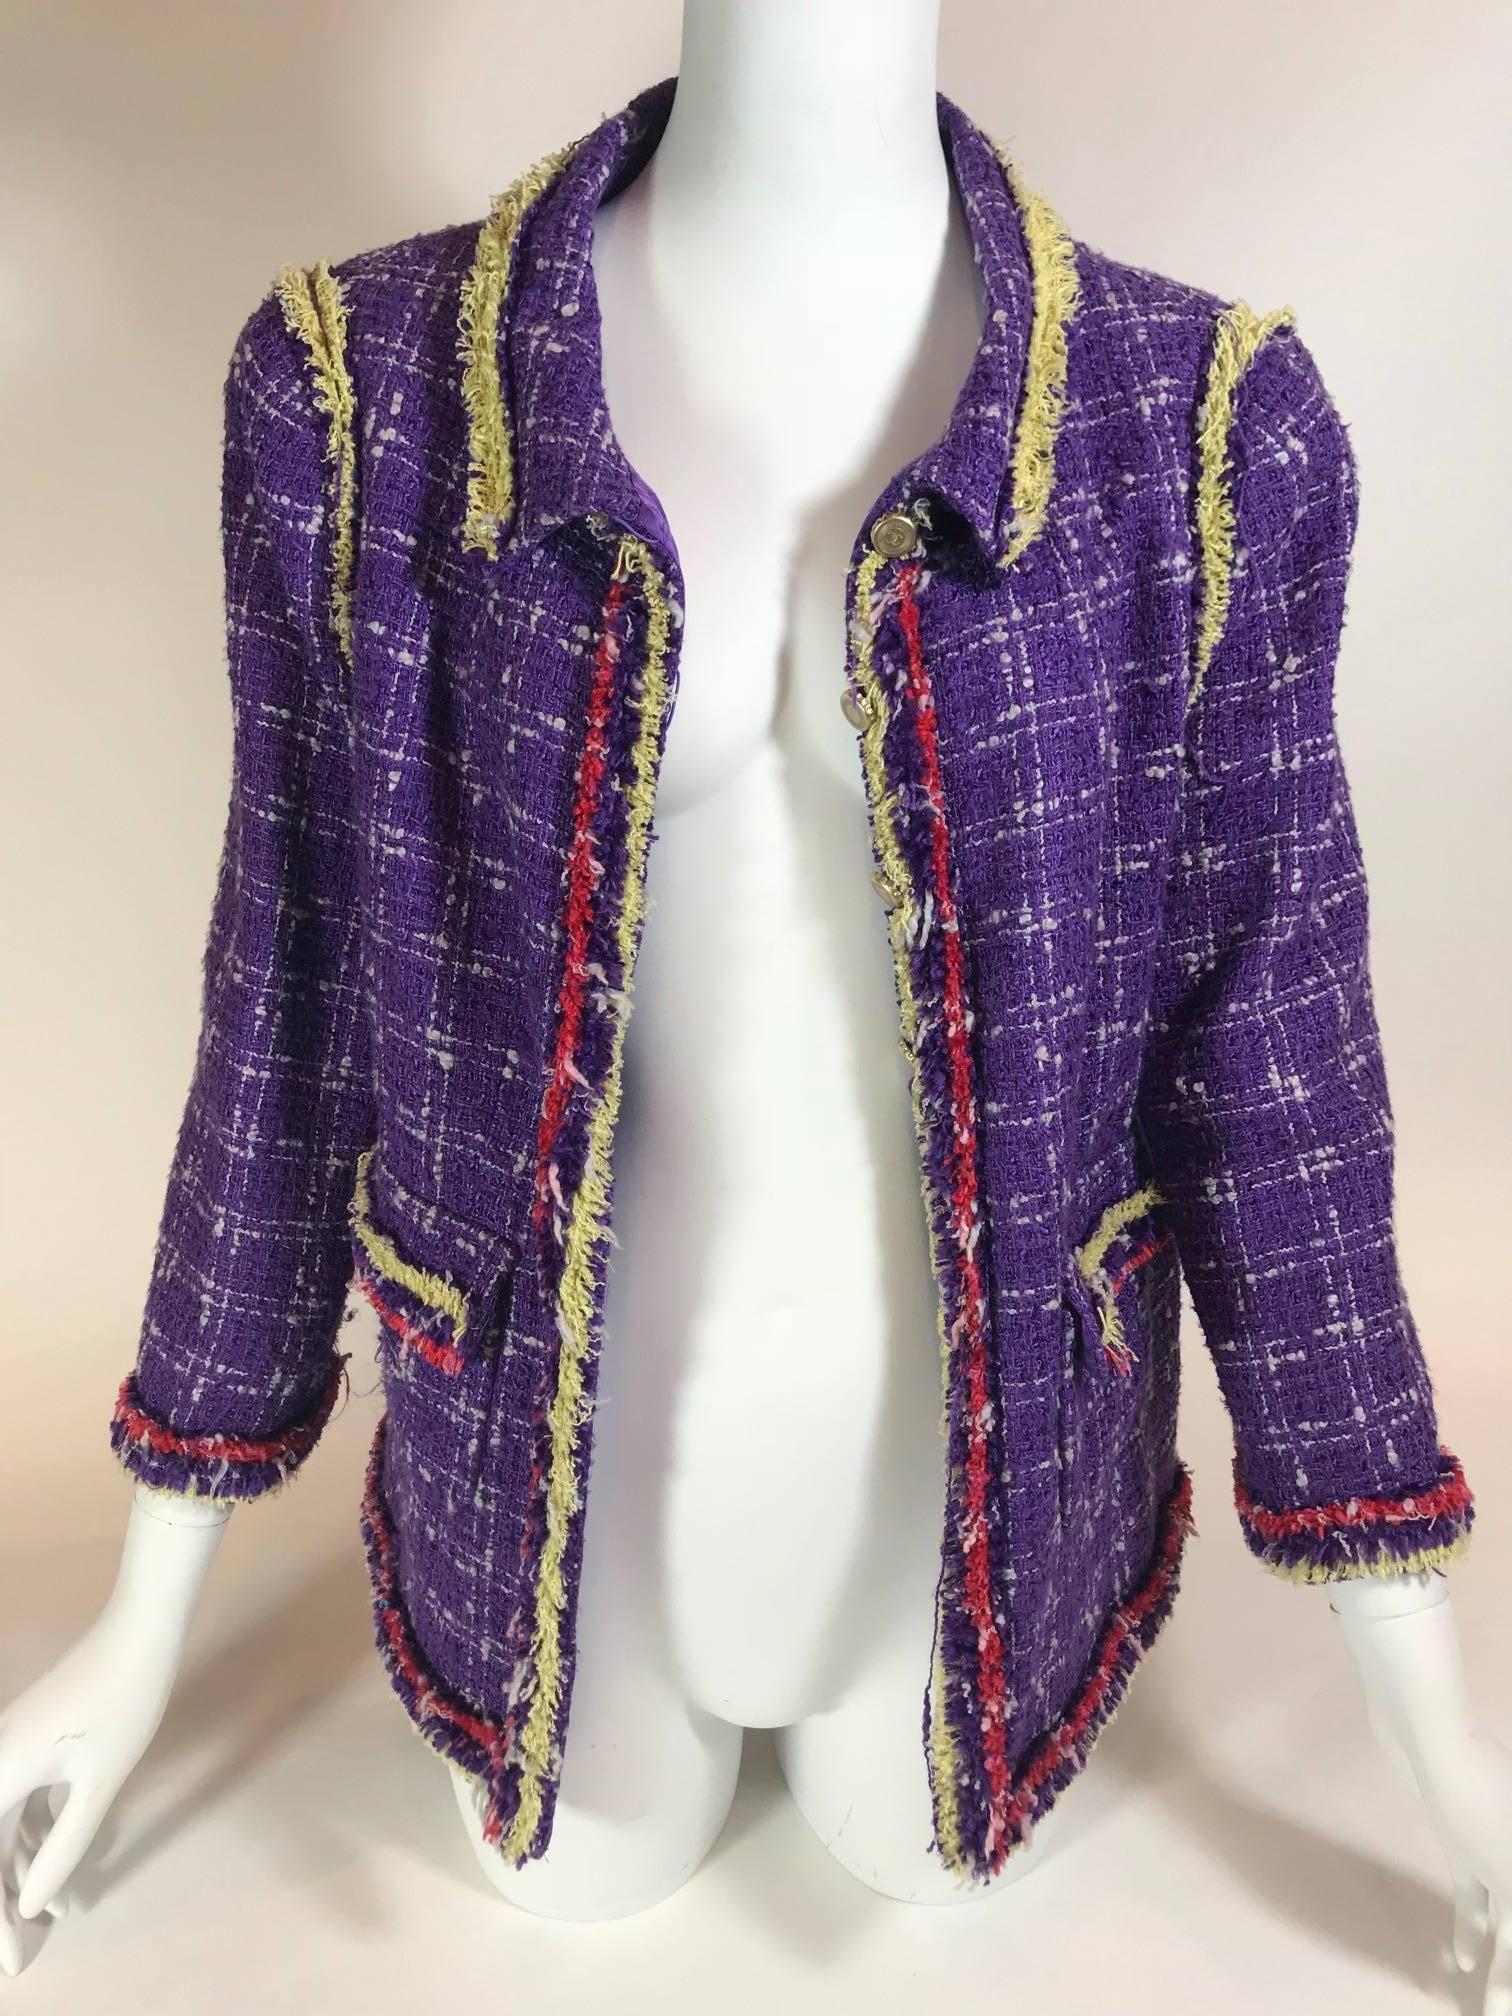 Violet, red and yellow tweed silk-blend jacket. Gold-tone hardware. 